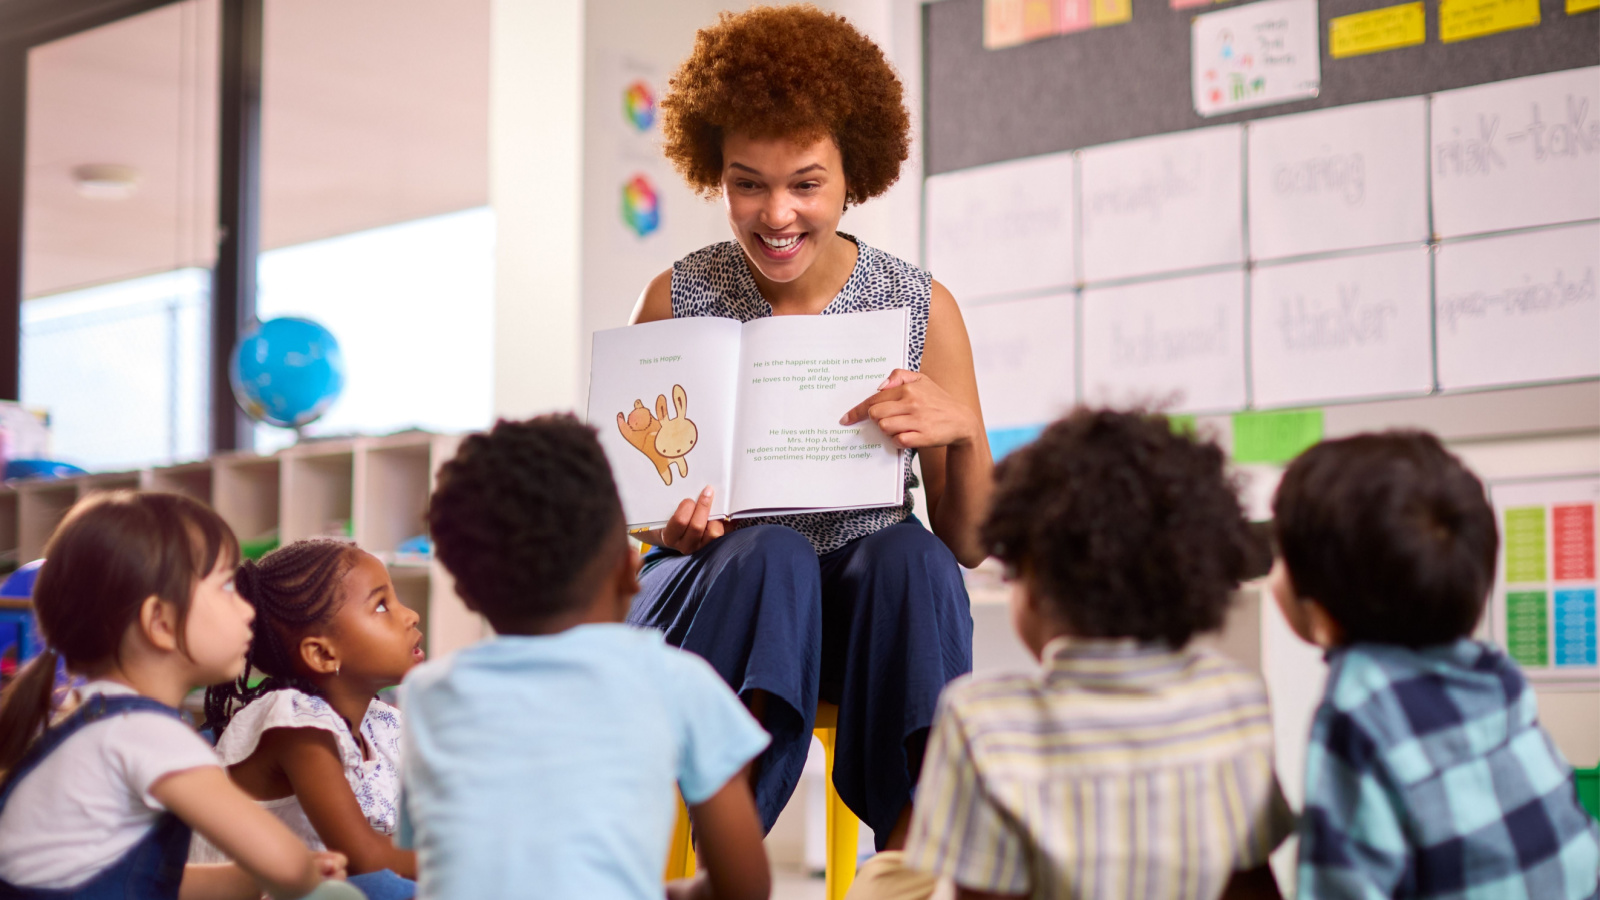 image credit: Monkey Business Images/Shutterstock <p><span>In California specifically, the “science of reading” addresses current literacy challenges and prepares the state for upcoming requirements, such as dyslexia screening in schools. This approach is essential for equipping teachers with the necessary skills to improve student outcomes.</span></p>